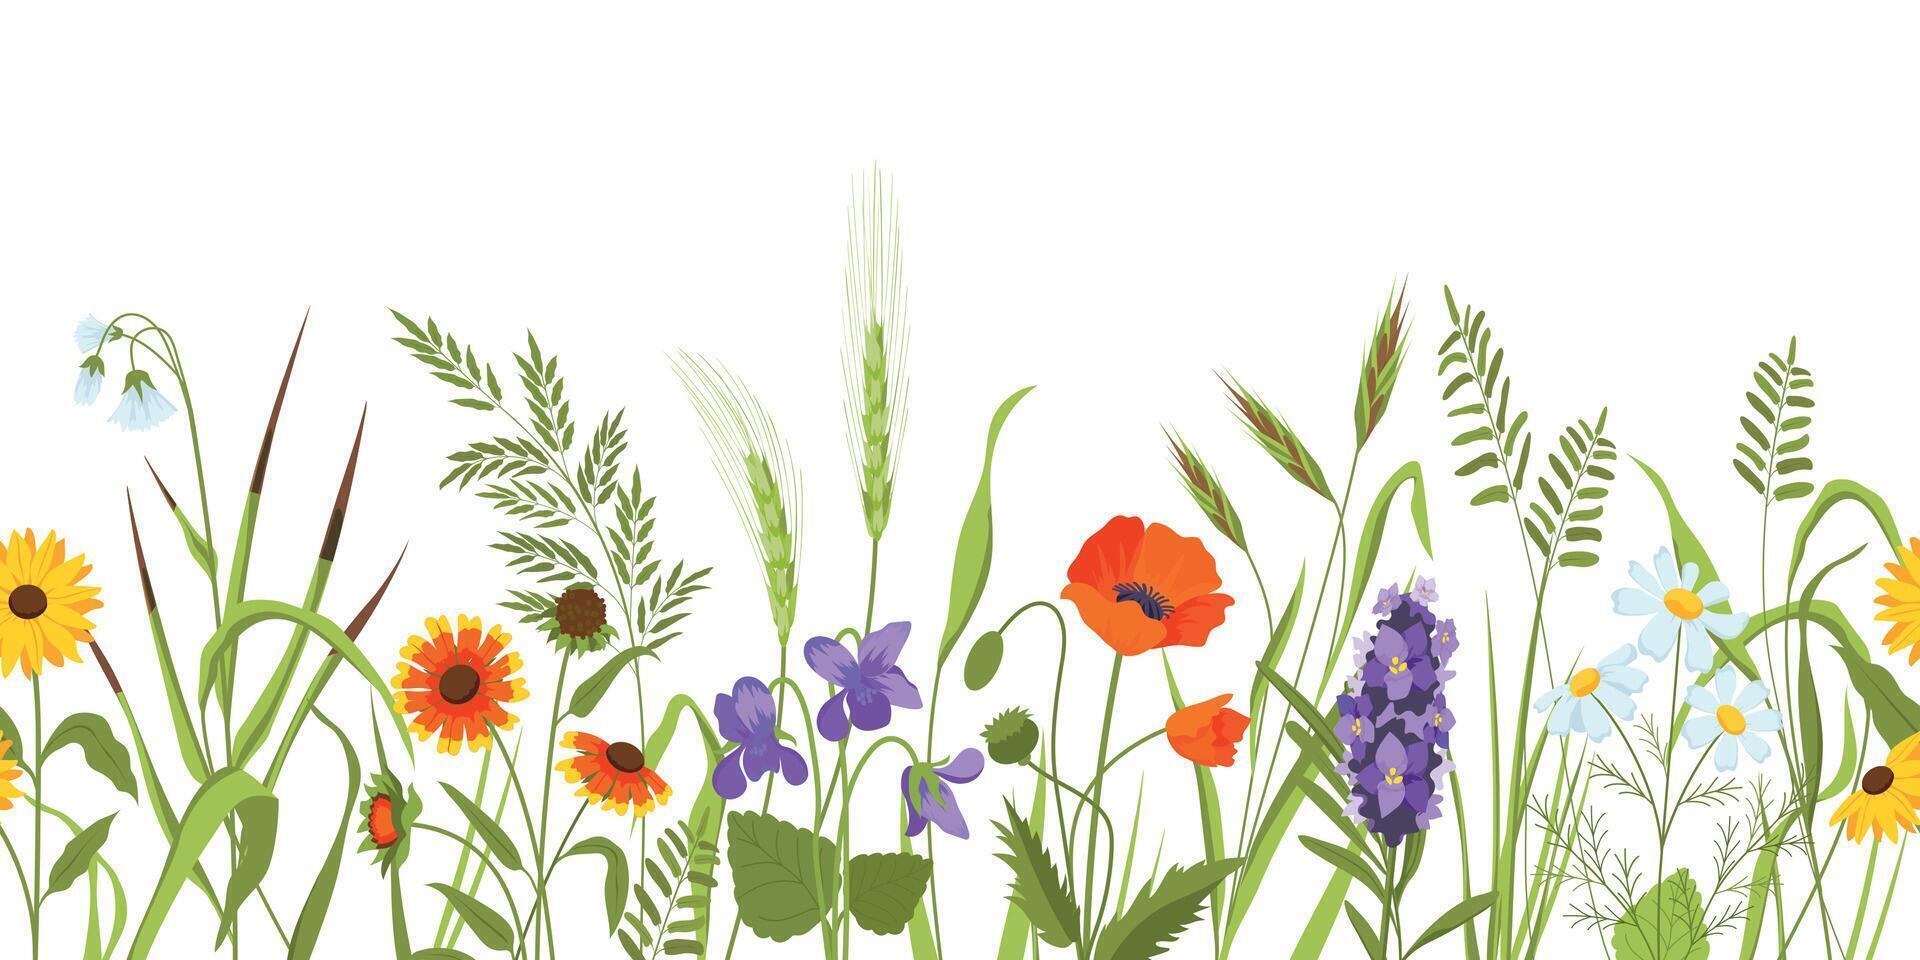 Wild meadow with flowers and herbs, spring botanical seamless border. Wildflower field with plants, ears and grass. Floral vector background